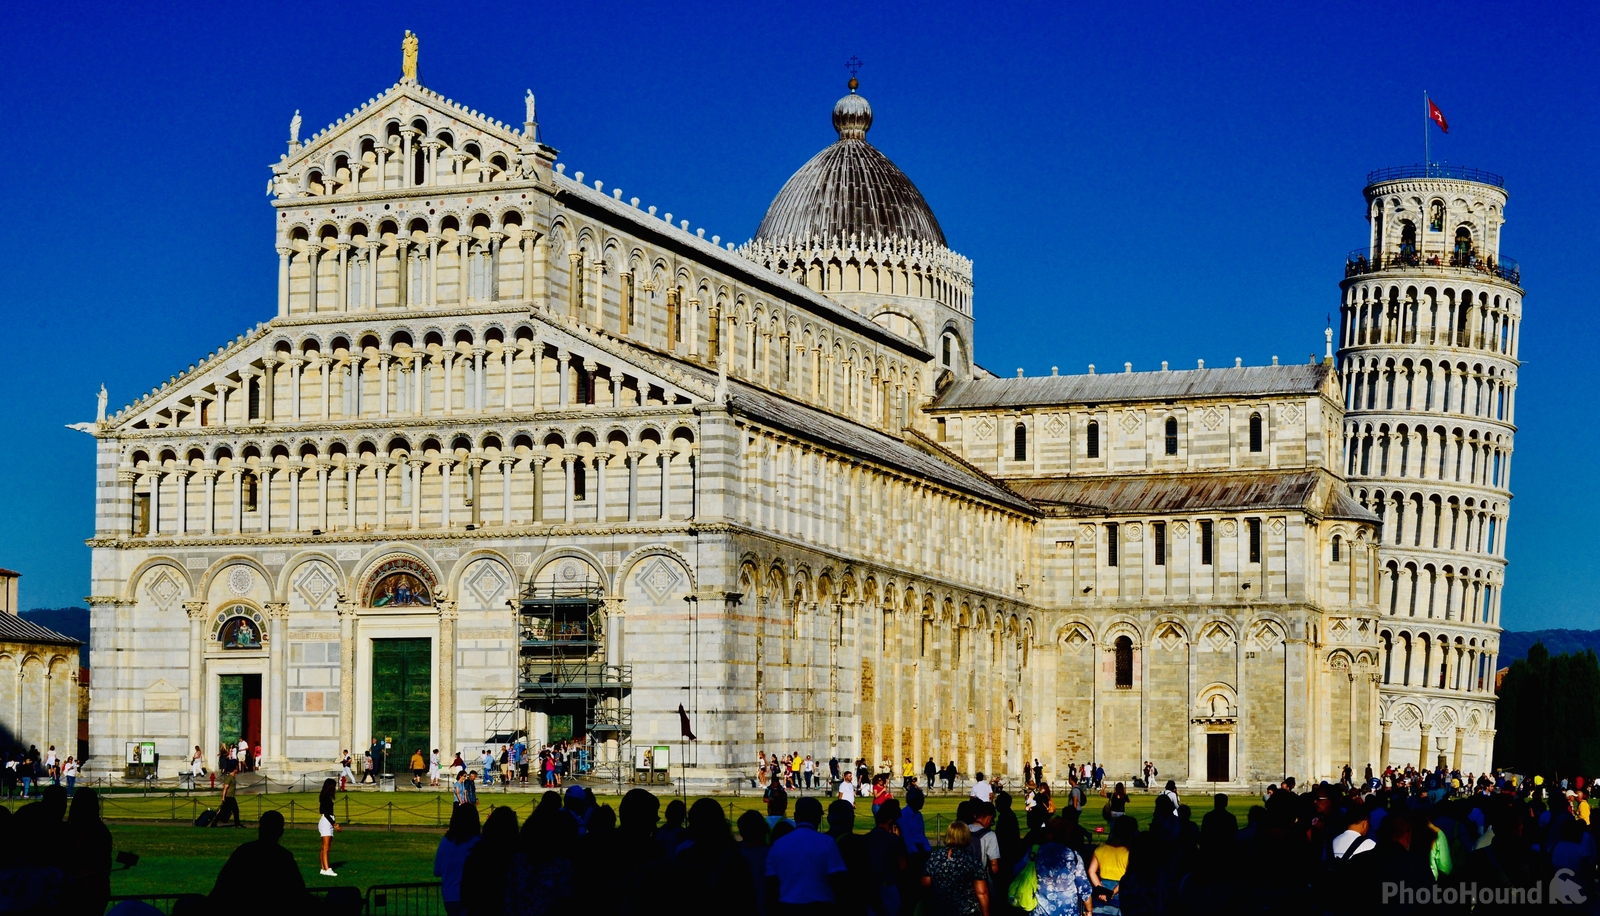 Image of Piazza del Duomo, Pisa by Giovanni Geddesi